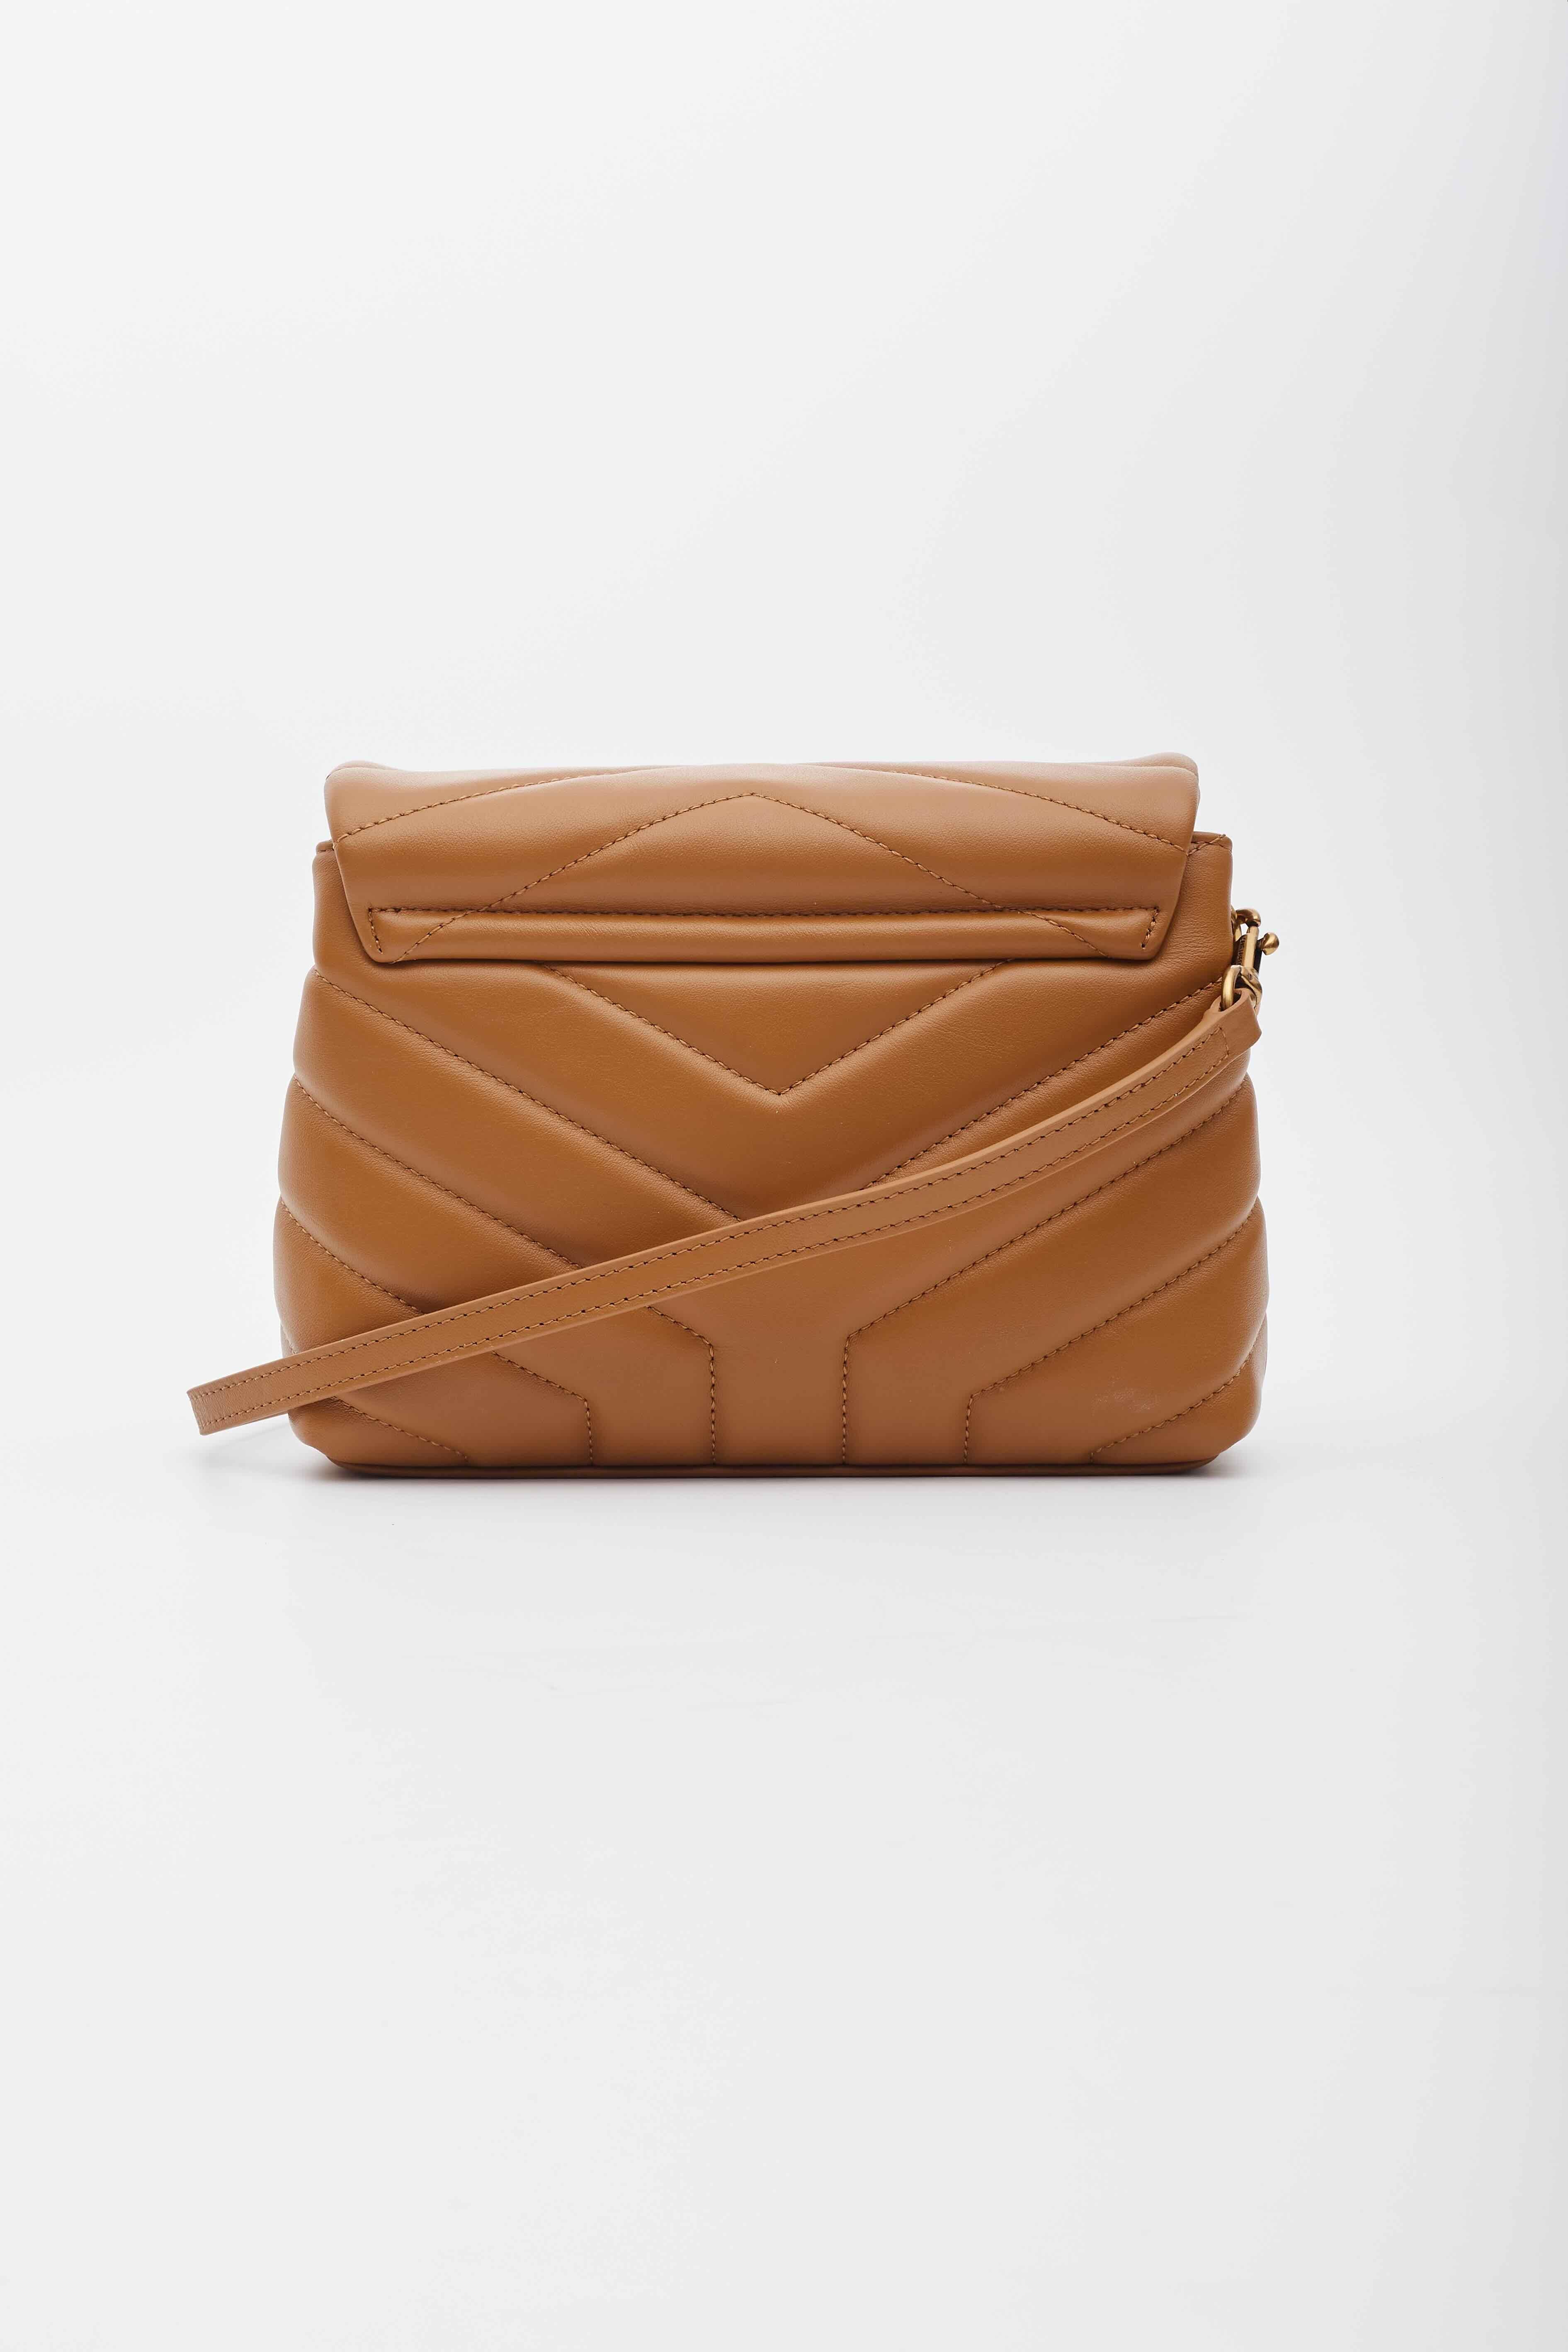 This shoulder bag is made of smooth calfskin leather in dark tan. The bag features signature Y quilting, the brand monogram at front, a  crossbody strap, aged gold hardware, a front flap and an interior of black fabric with multi compartments and a